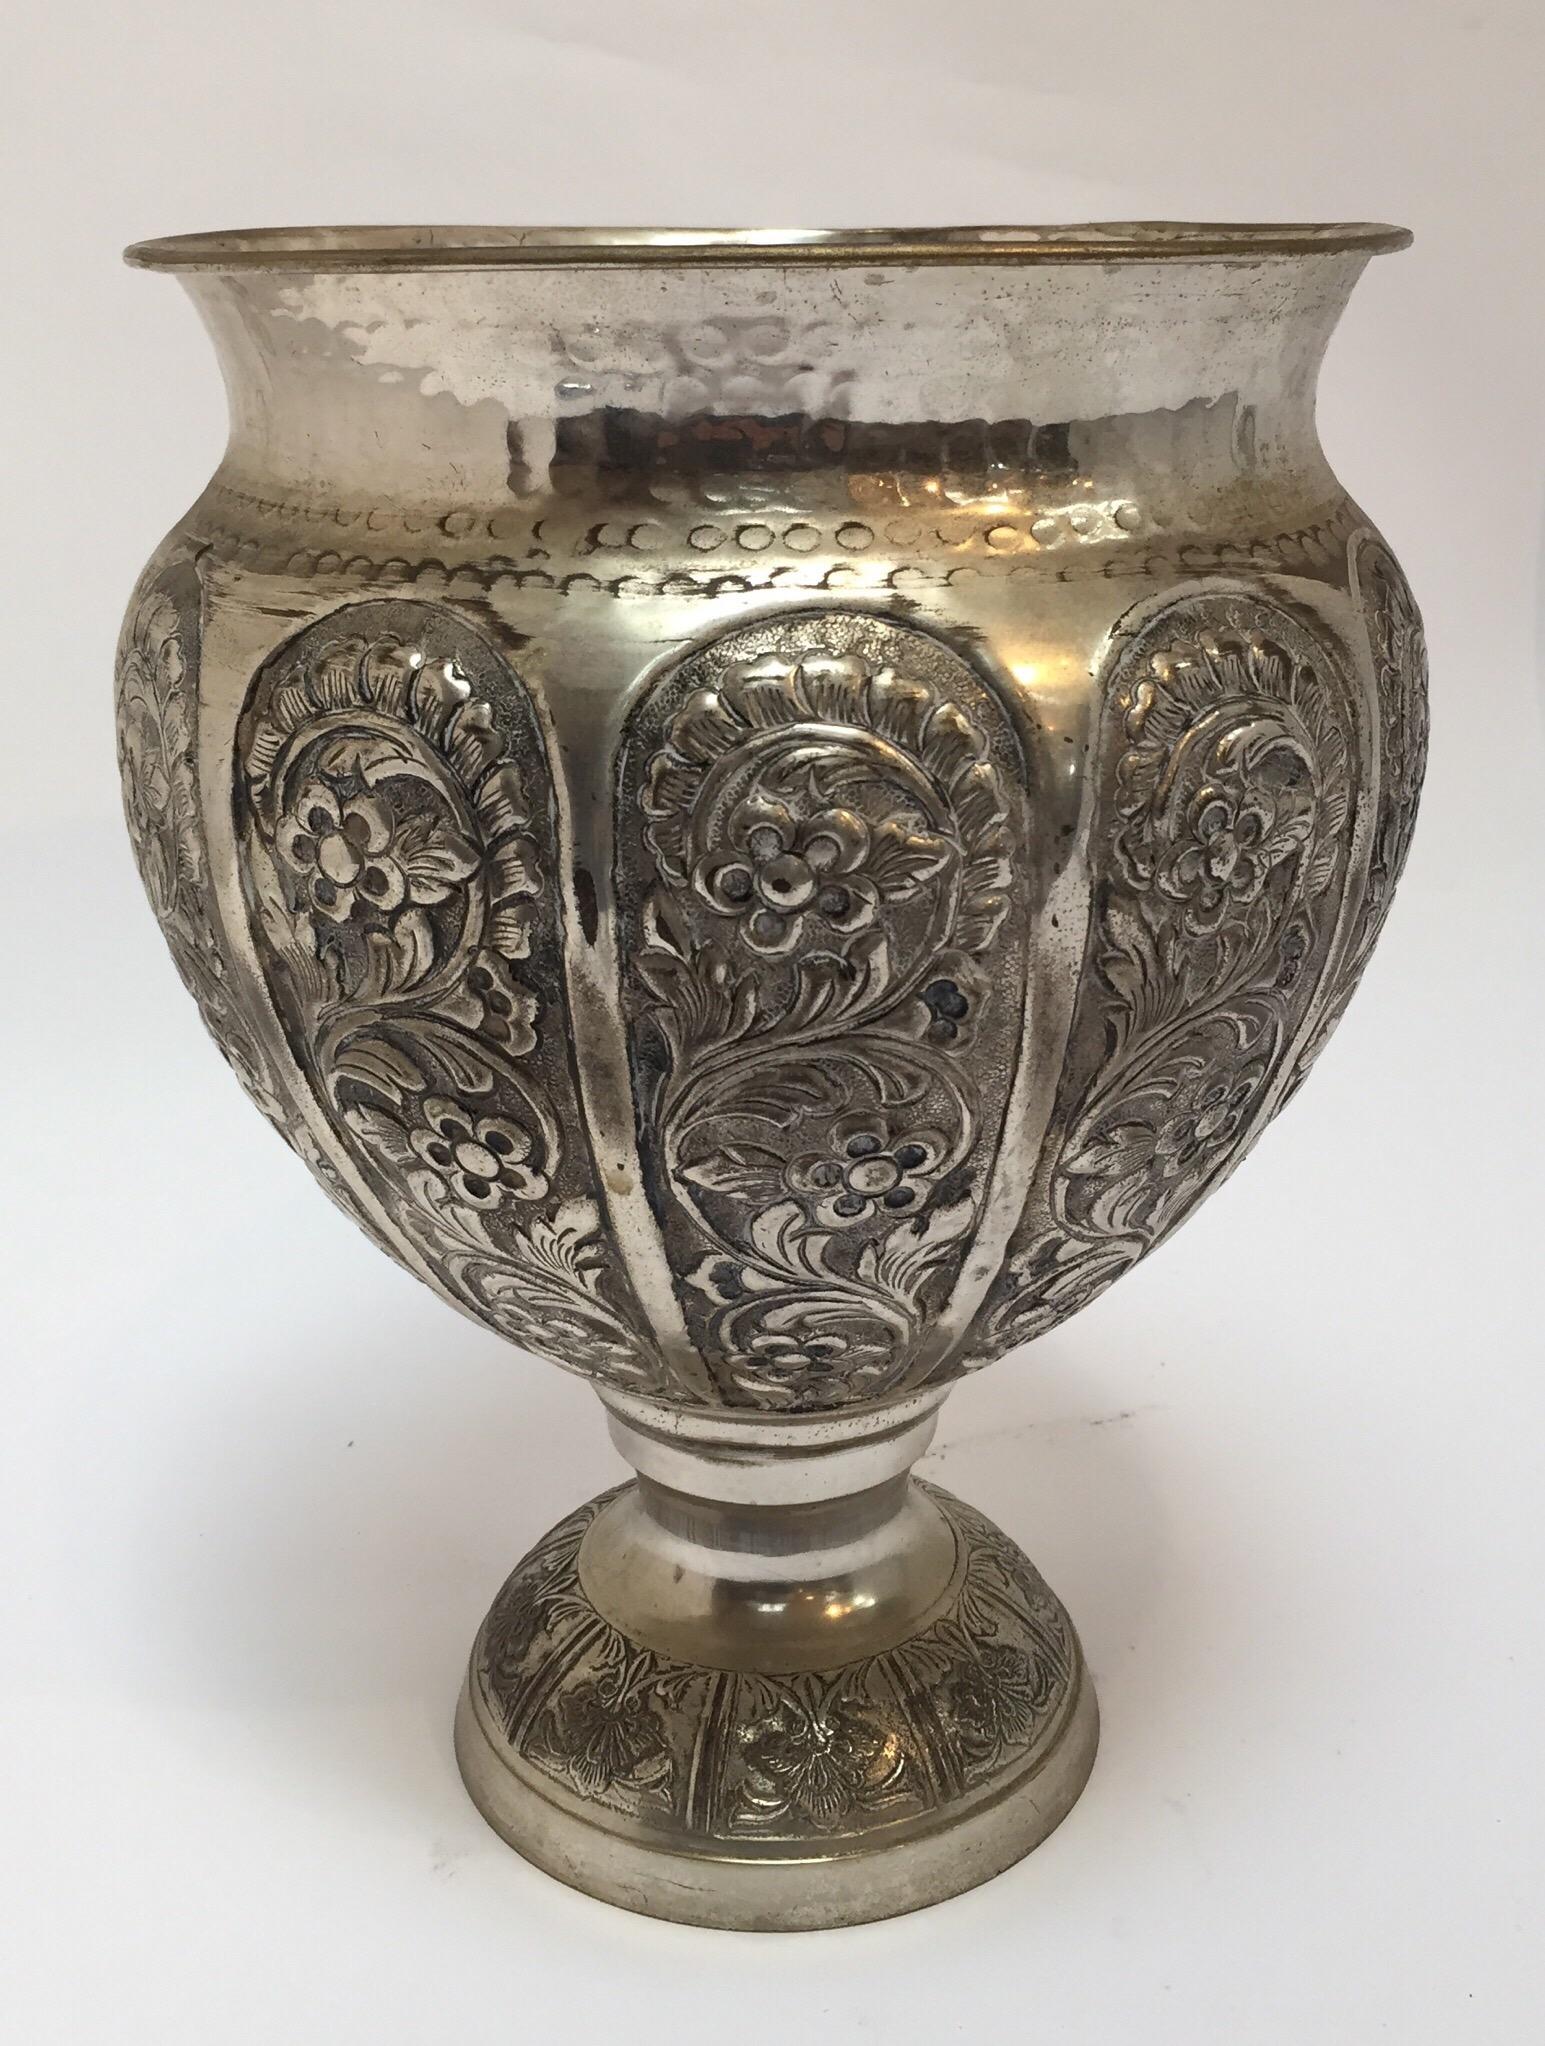 Anglo-Raj style silvered footed vase.
Decorated with embossed floral pattern.
Great to use as wine or champagne bucket cooler for a chic Bohemian look.
Lacquered will not tarnish.
Made in Rajasthan India.
Measures: Diameter 9.5